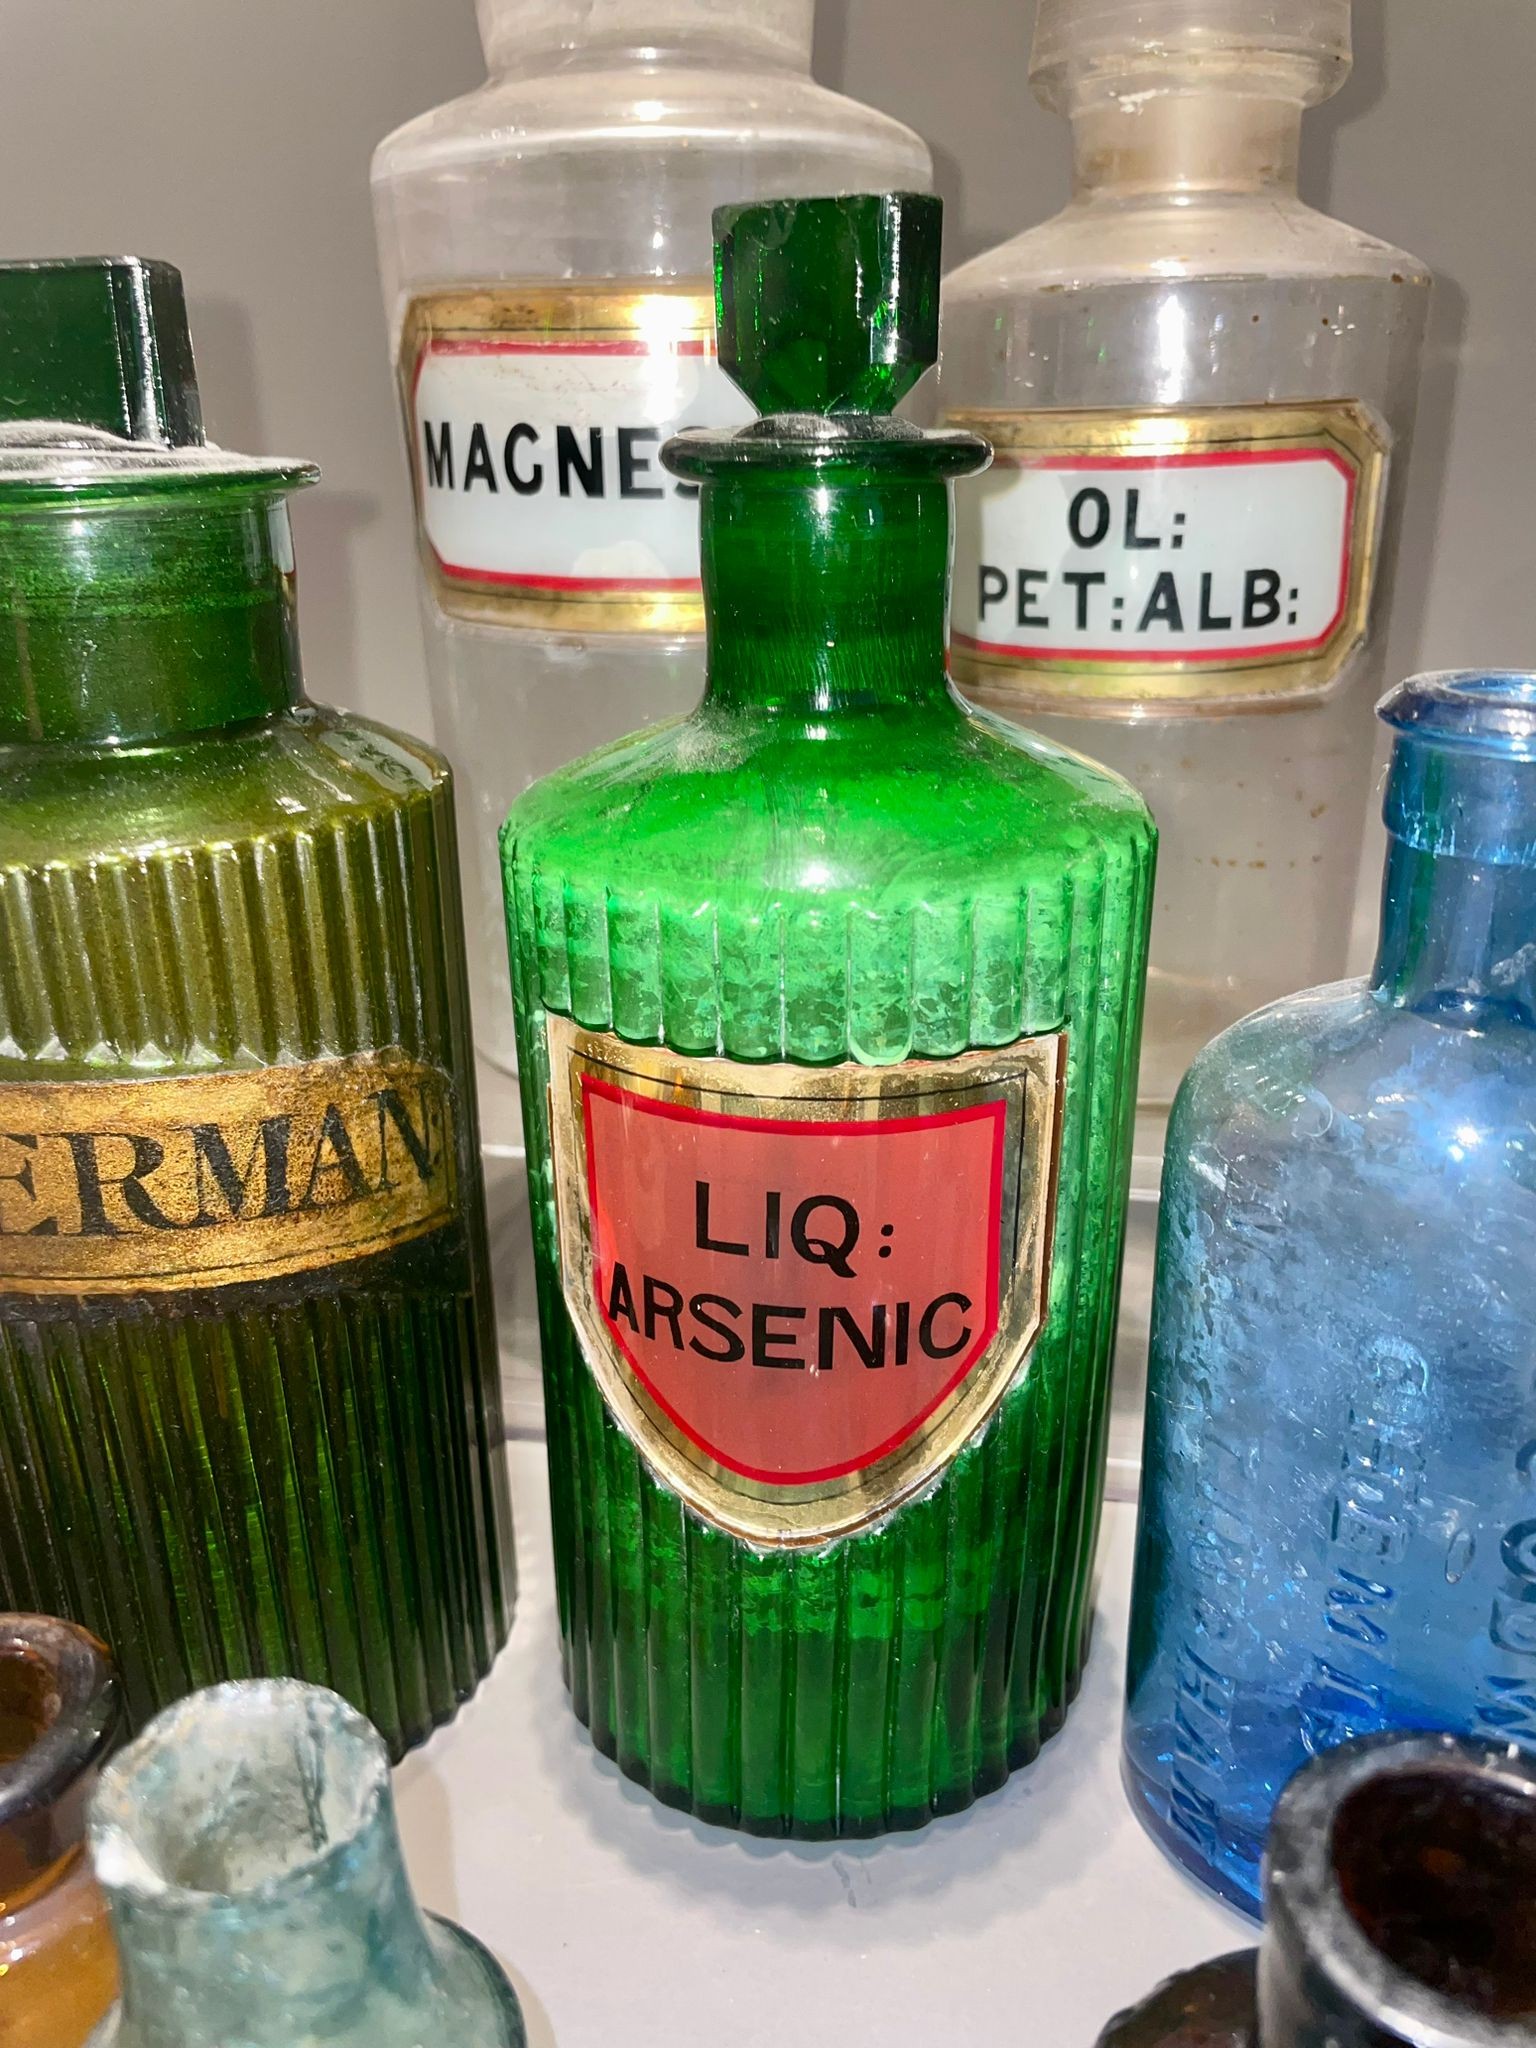 Glassware: early 20th Century bottles including Apothecary (Magnesia, OL:PET: ALB:, LIQ ARSENIC - Image 5 of 5